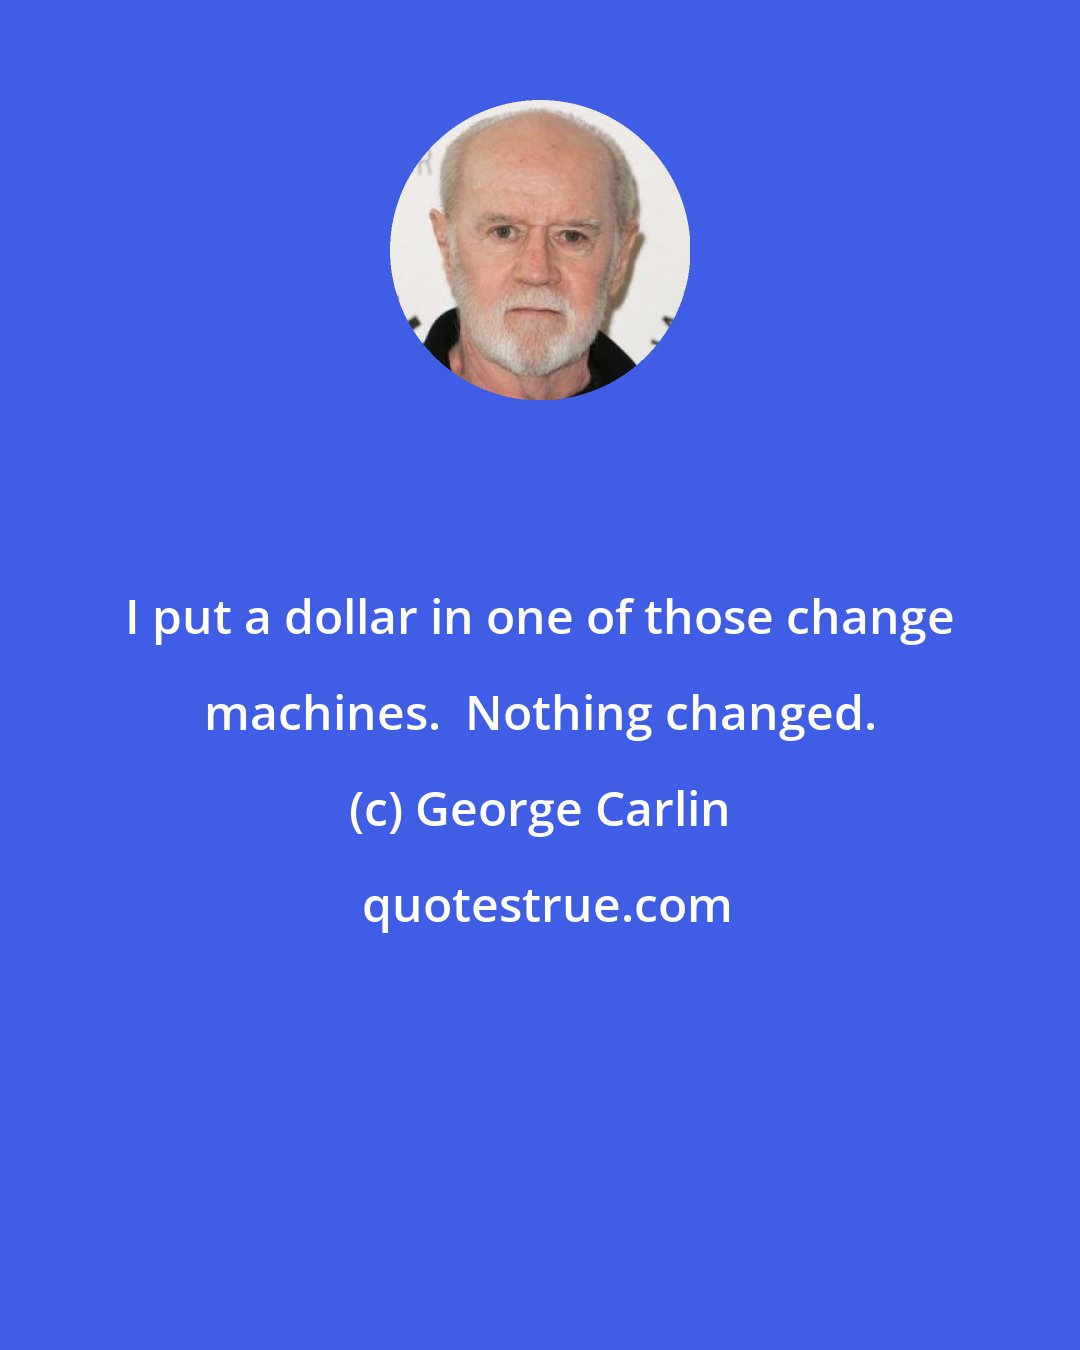 George Carlin: I put a dollar in one of those change machines.  Nothing changed.